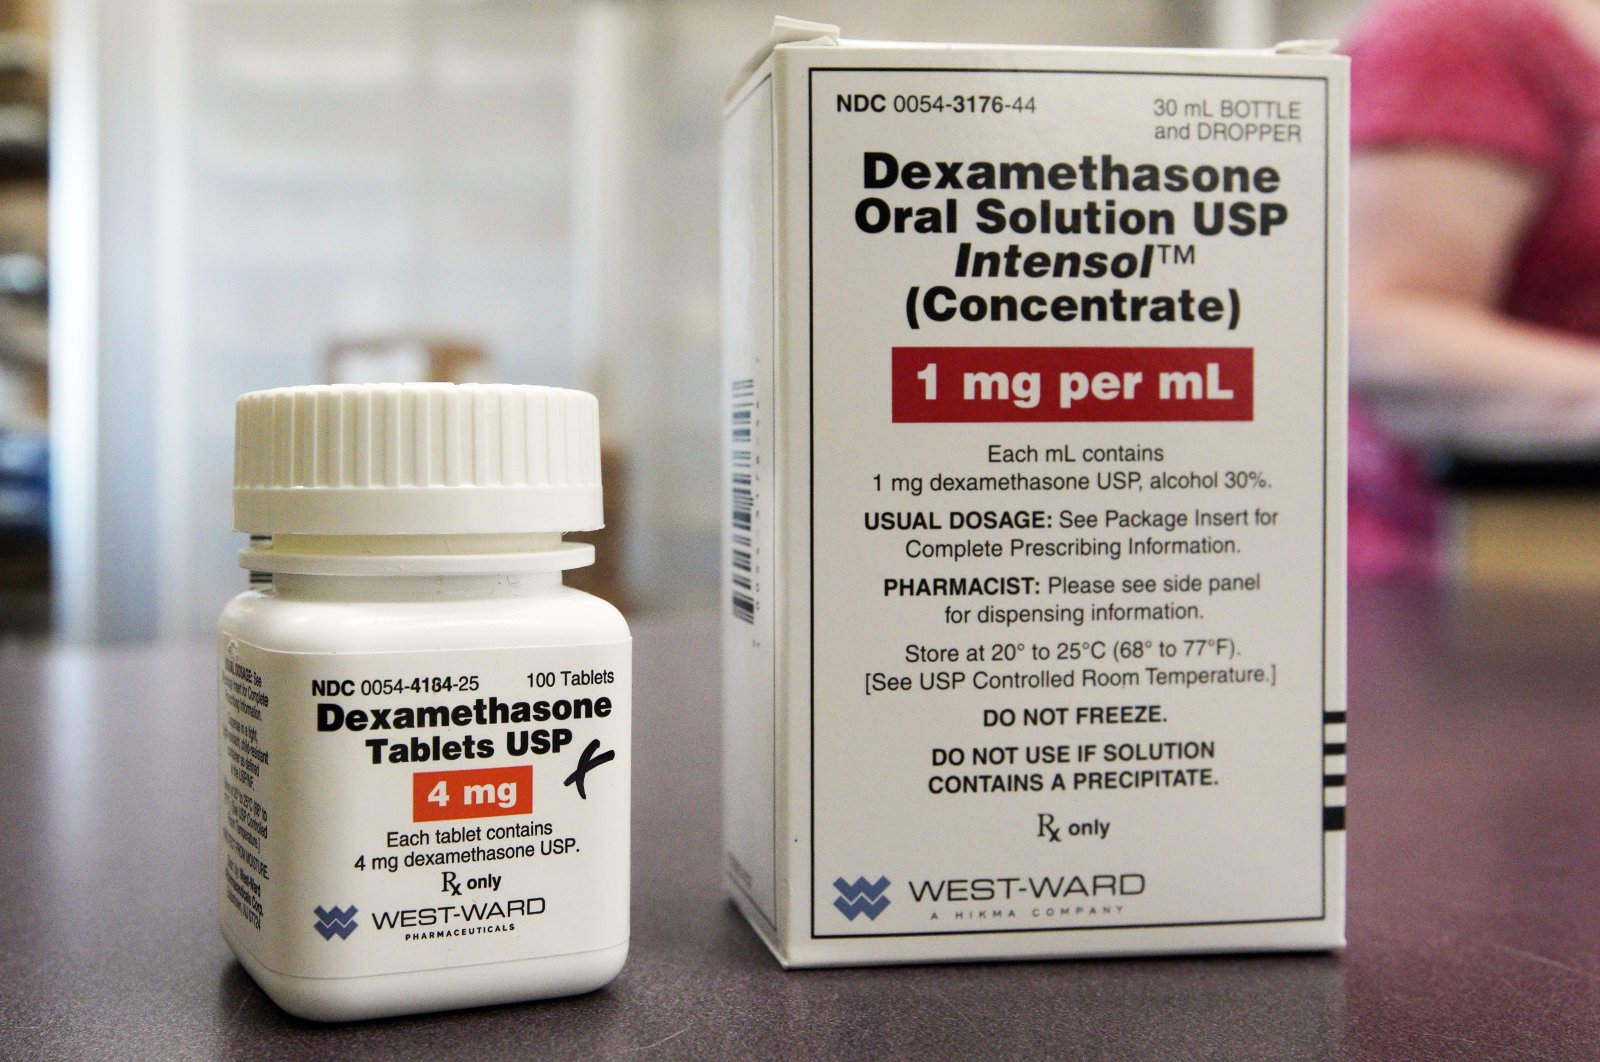 This Tuesday, June 16, 2020 file photo shows a bottle and box for dexamethasone in a pharmacy in Omaha, Neb. (AP Photo)